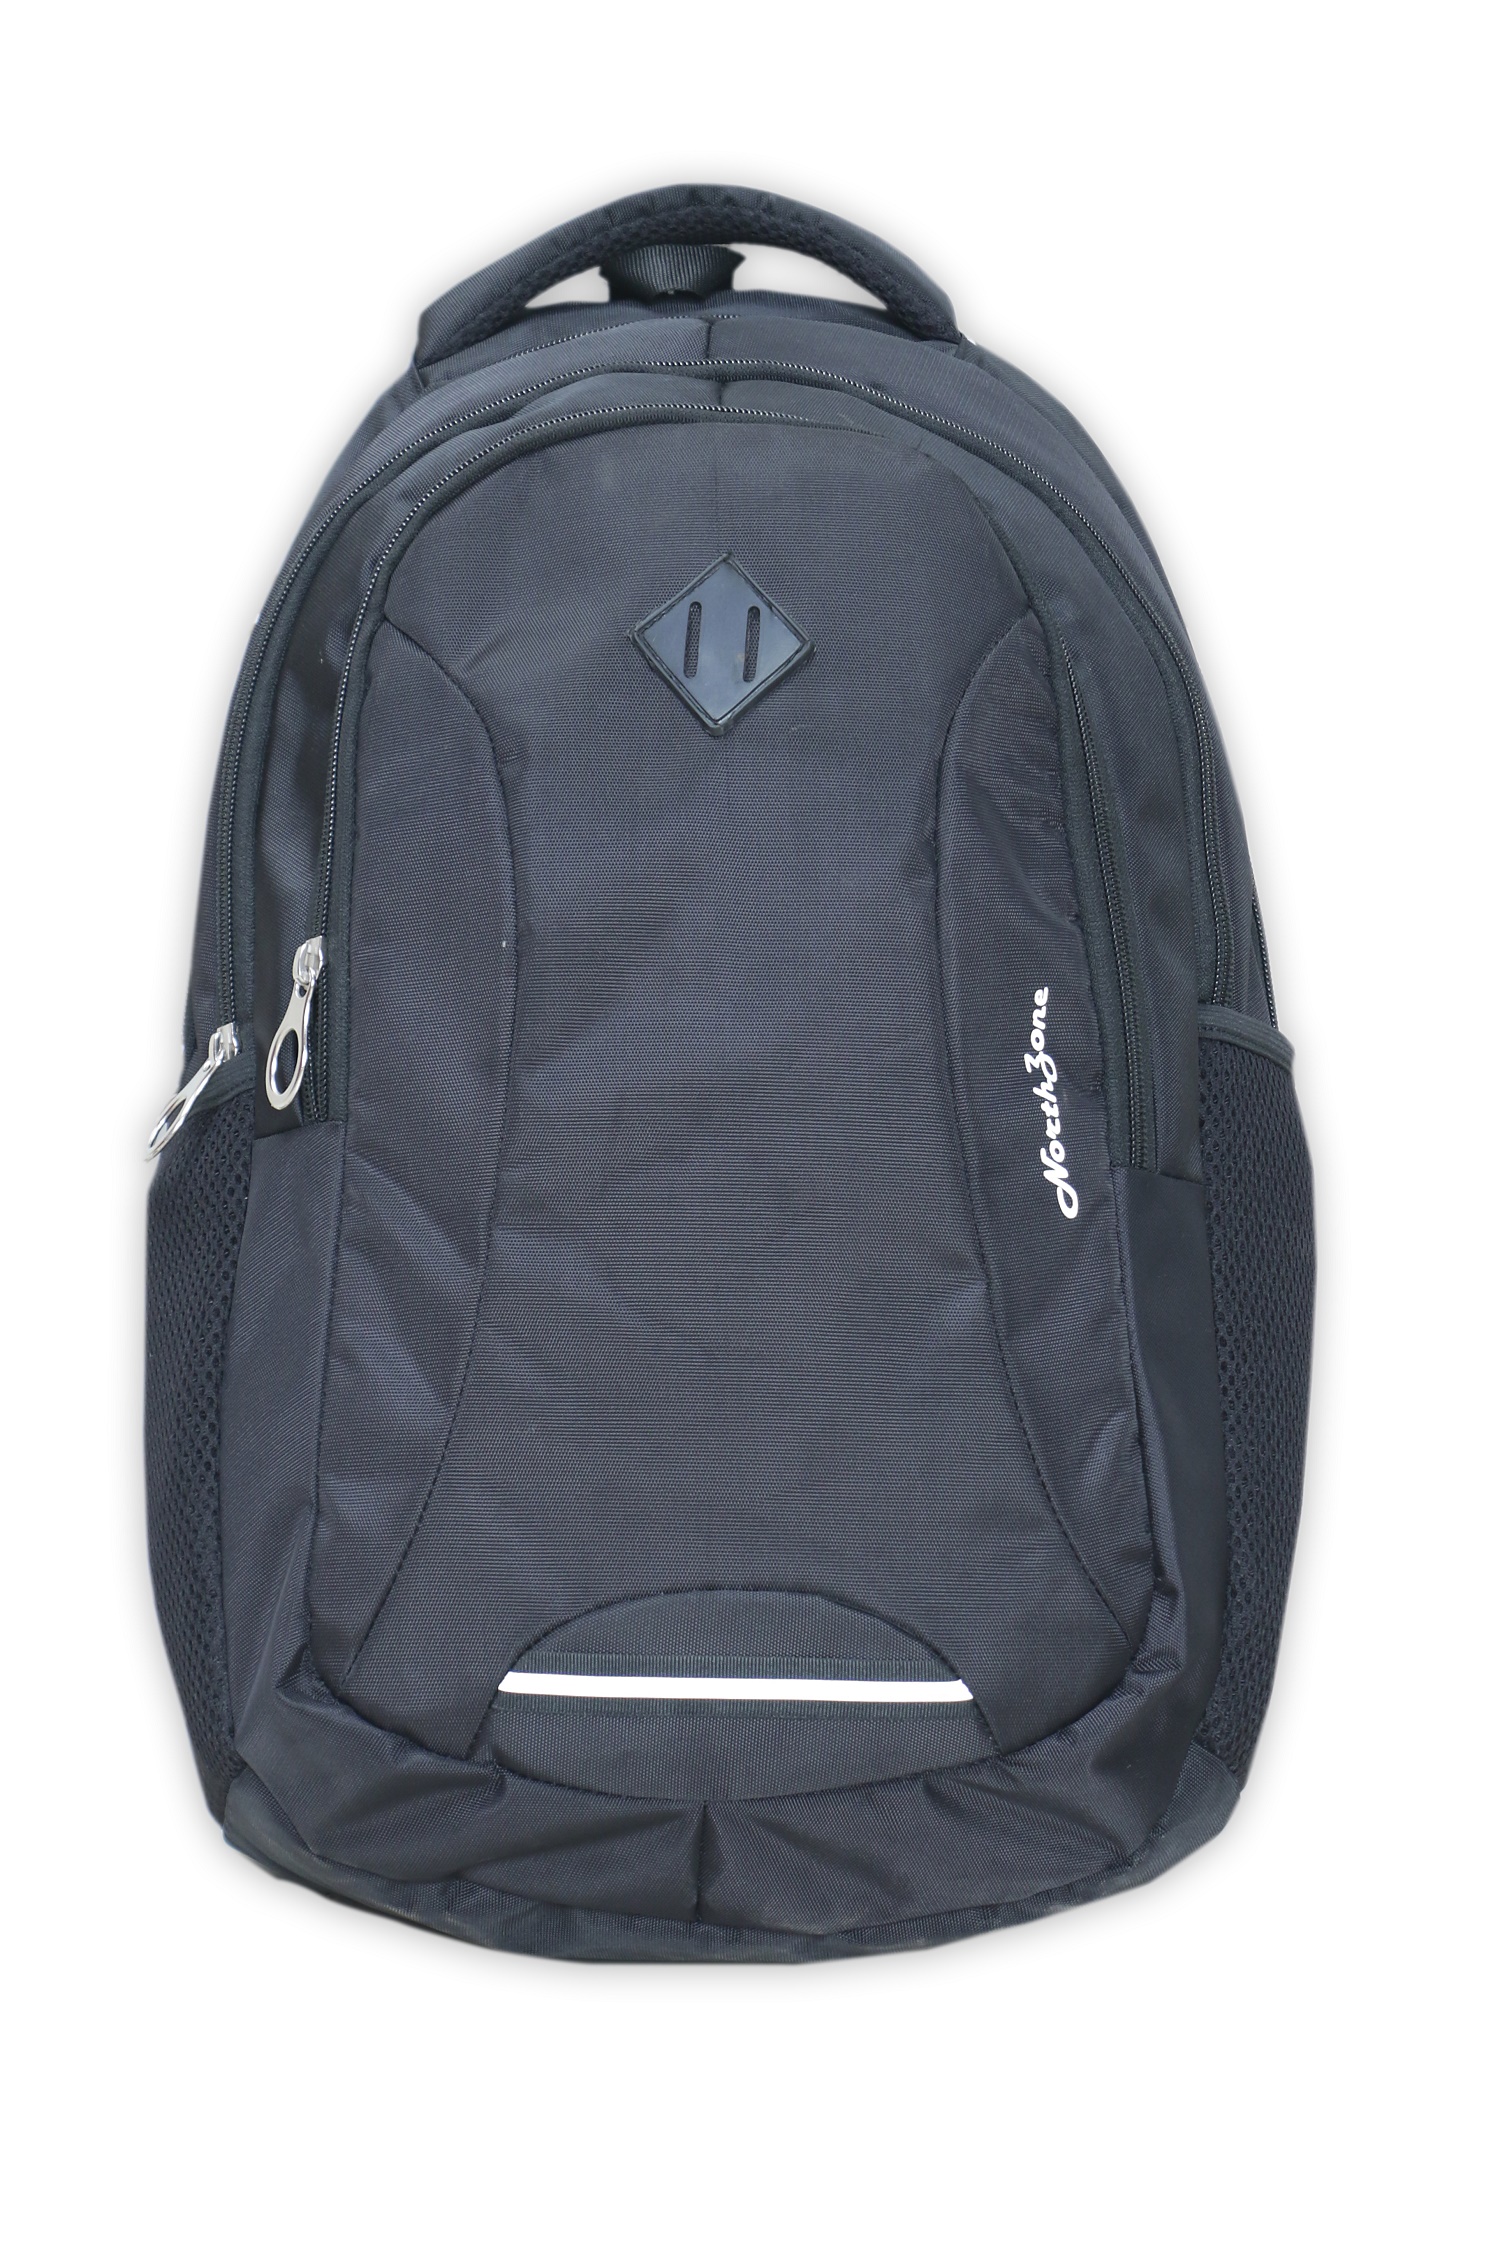 Buy Northzone All Expandable Laptop Bag And Backpack Online @ ₹595 from ...